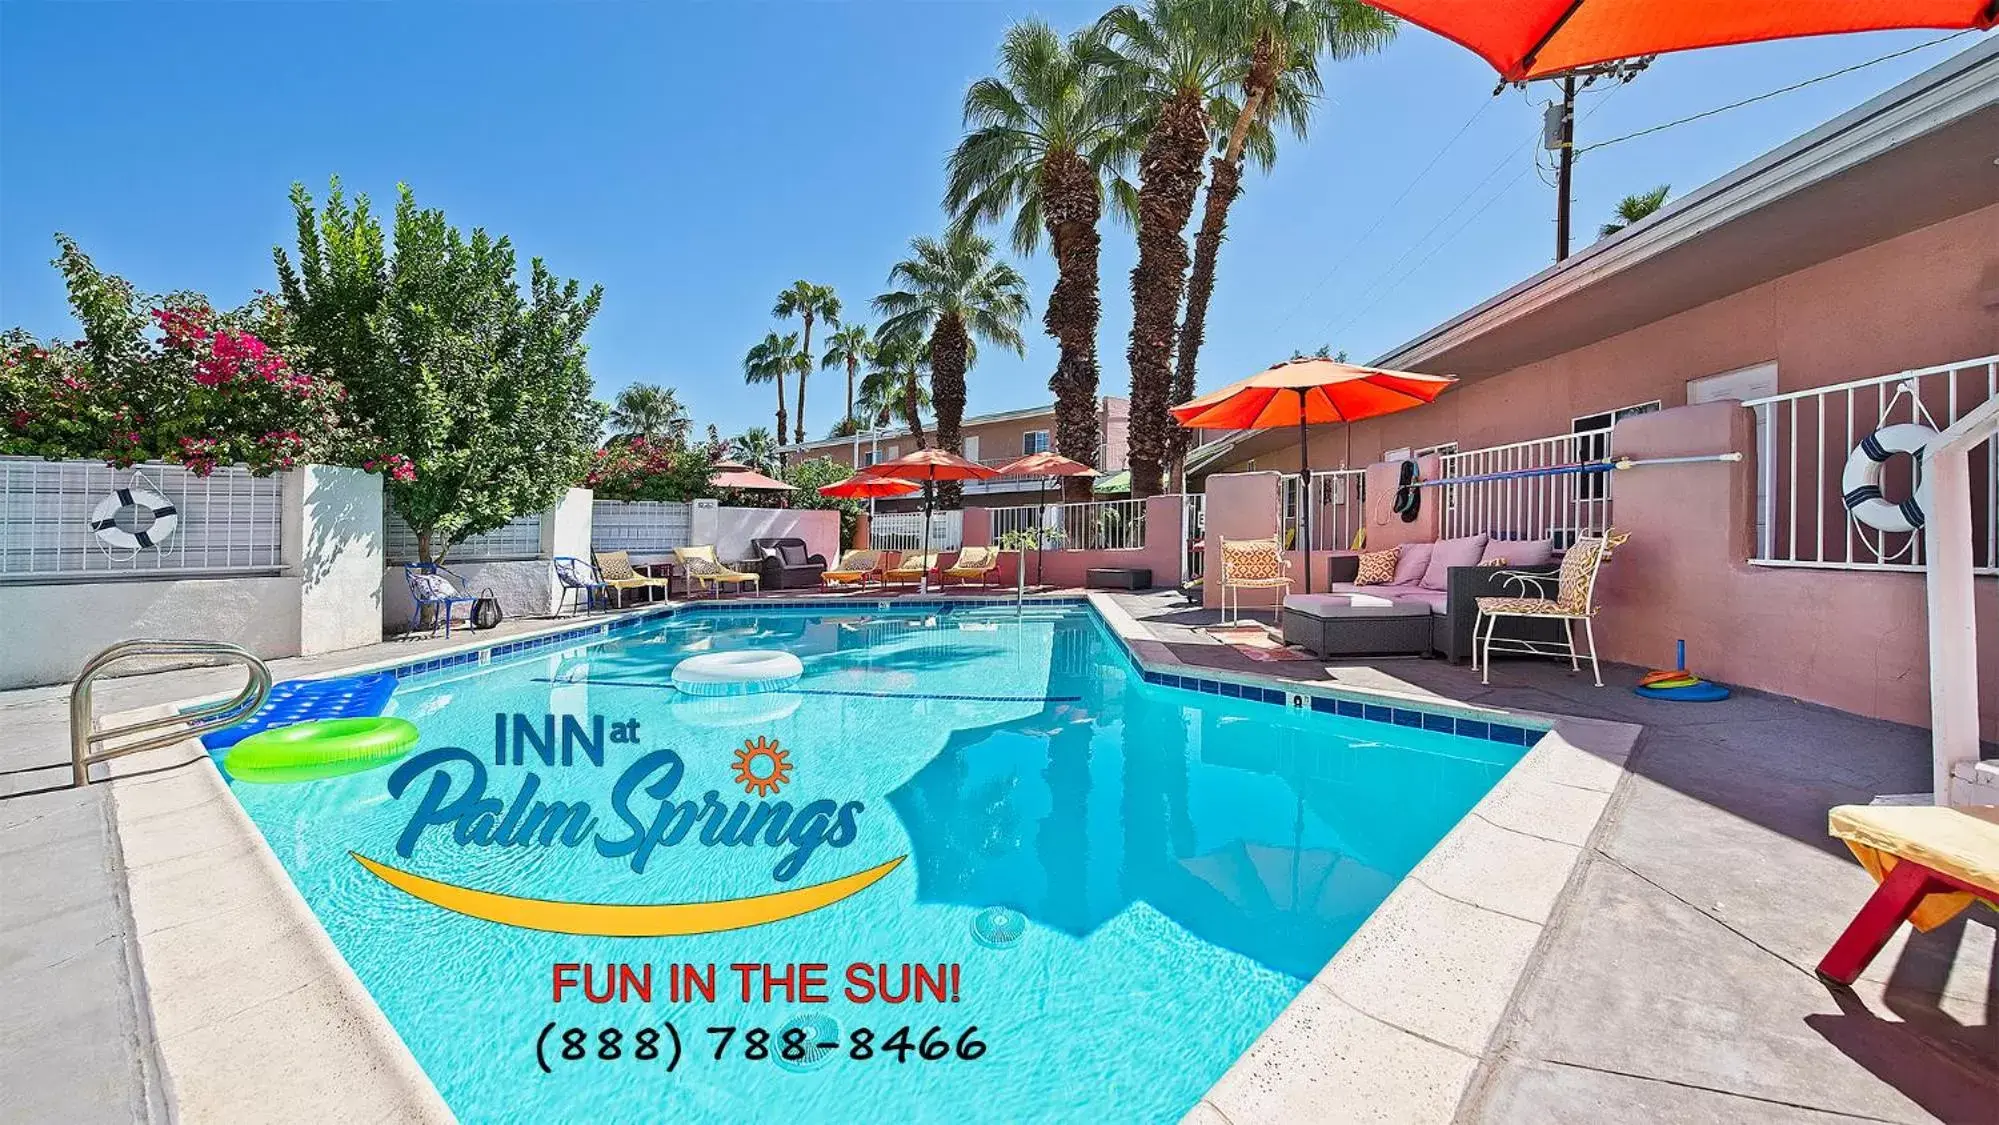 Property building, Swimming Pool in Inn at Palm Springs